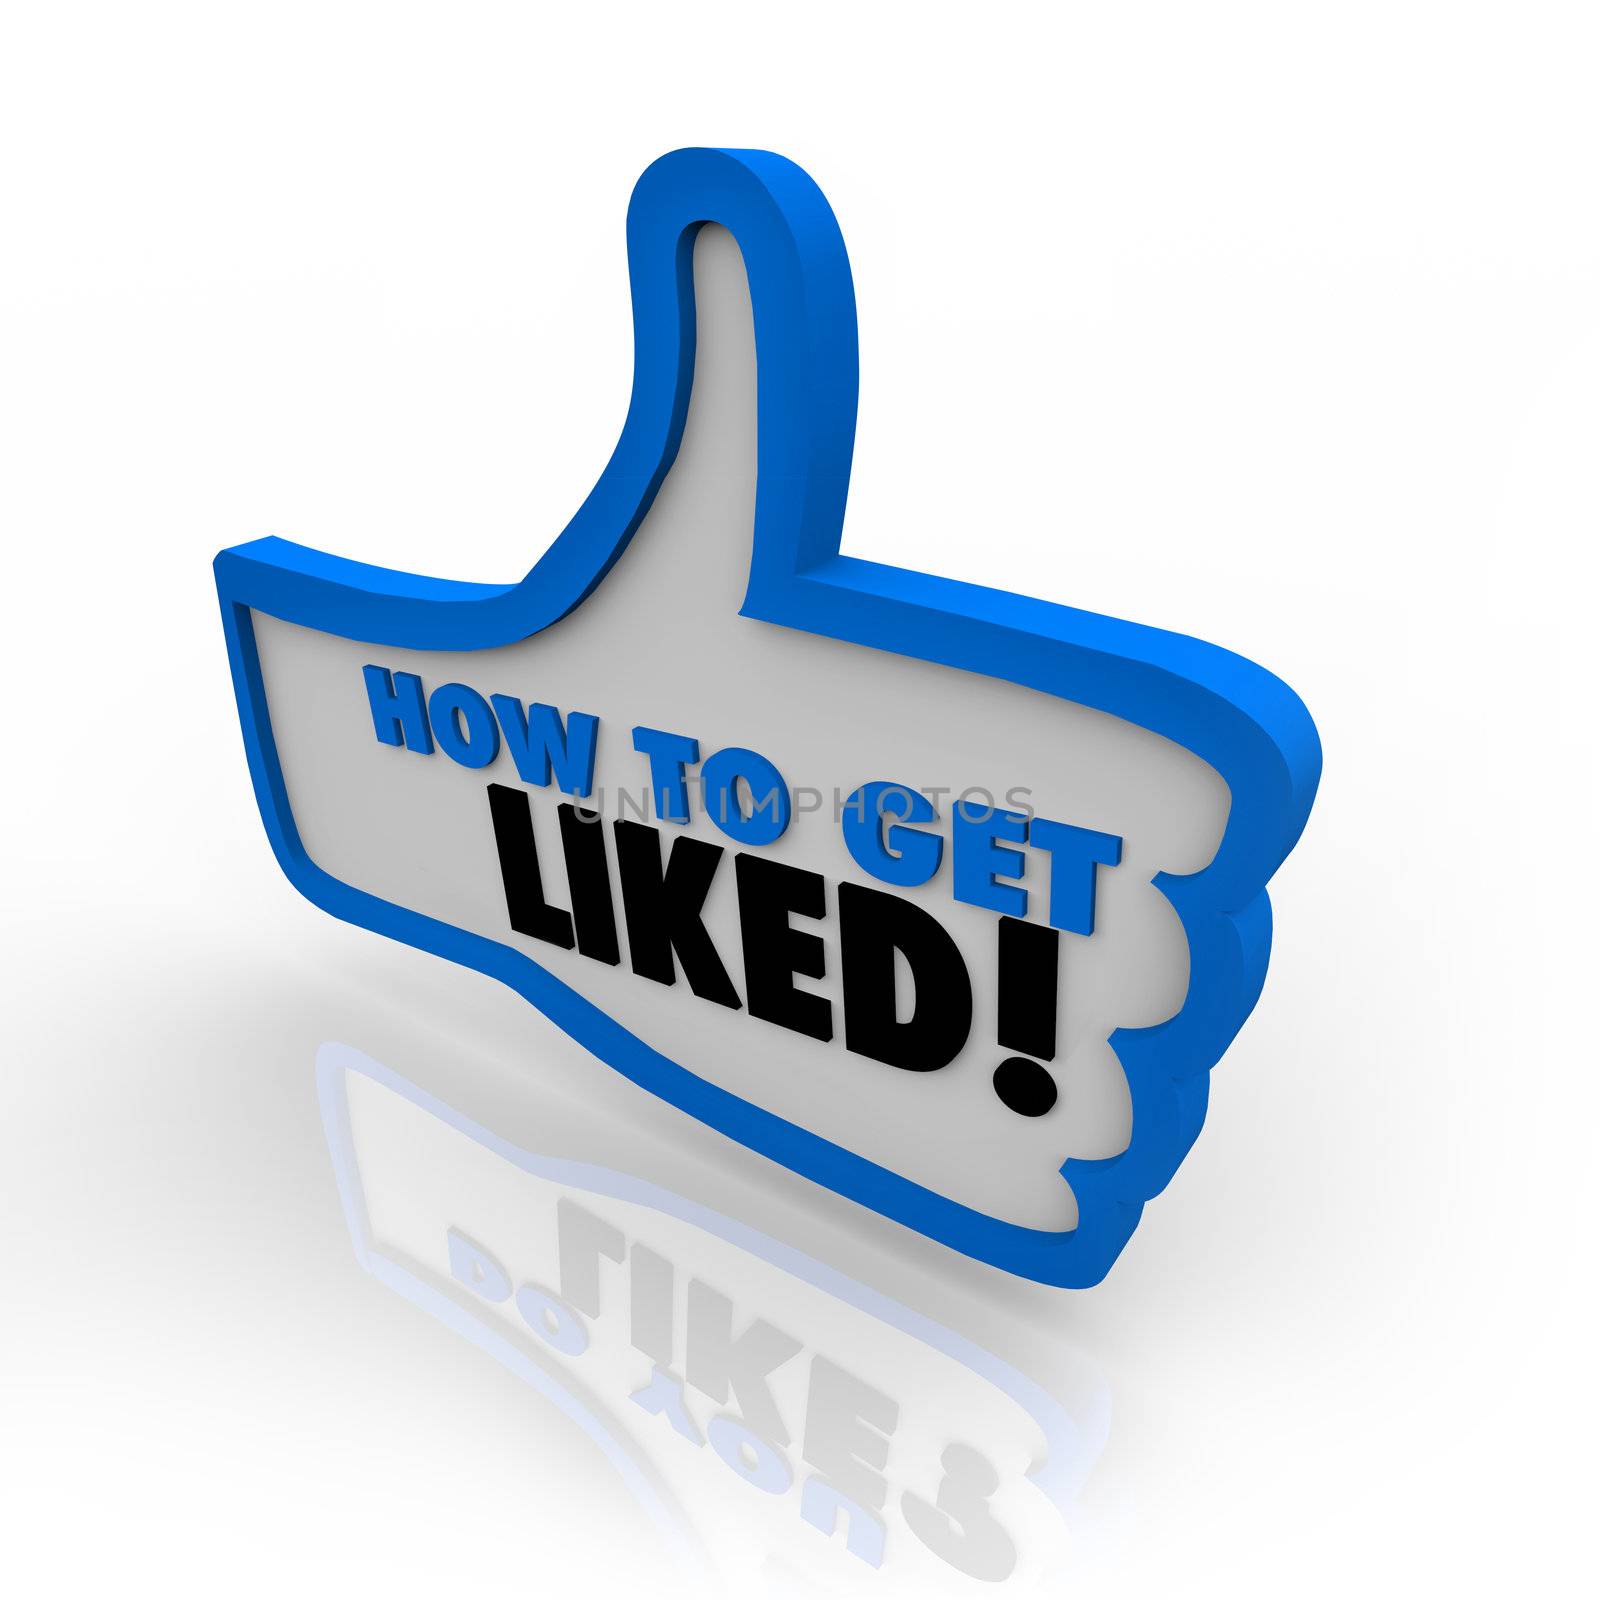 A blue outlined thumbs up icon with the words How to Get Liked offering advice on gaining popularity and approval on the internet or in business